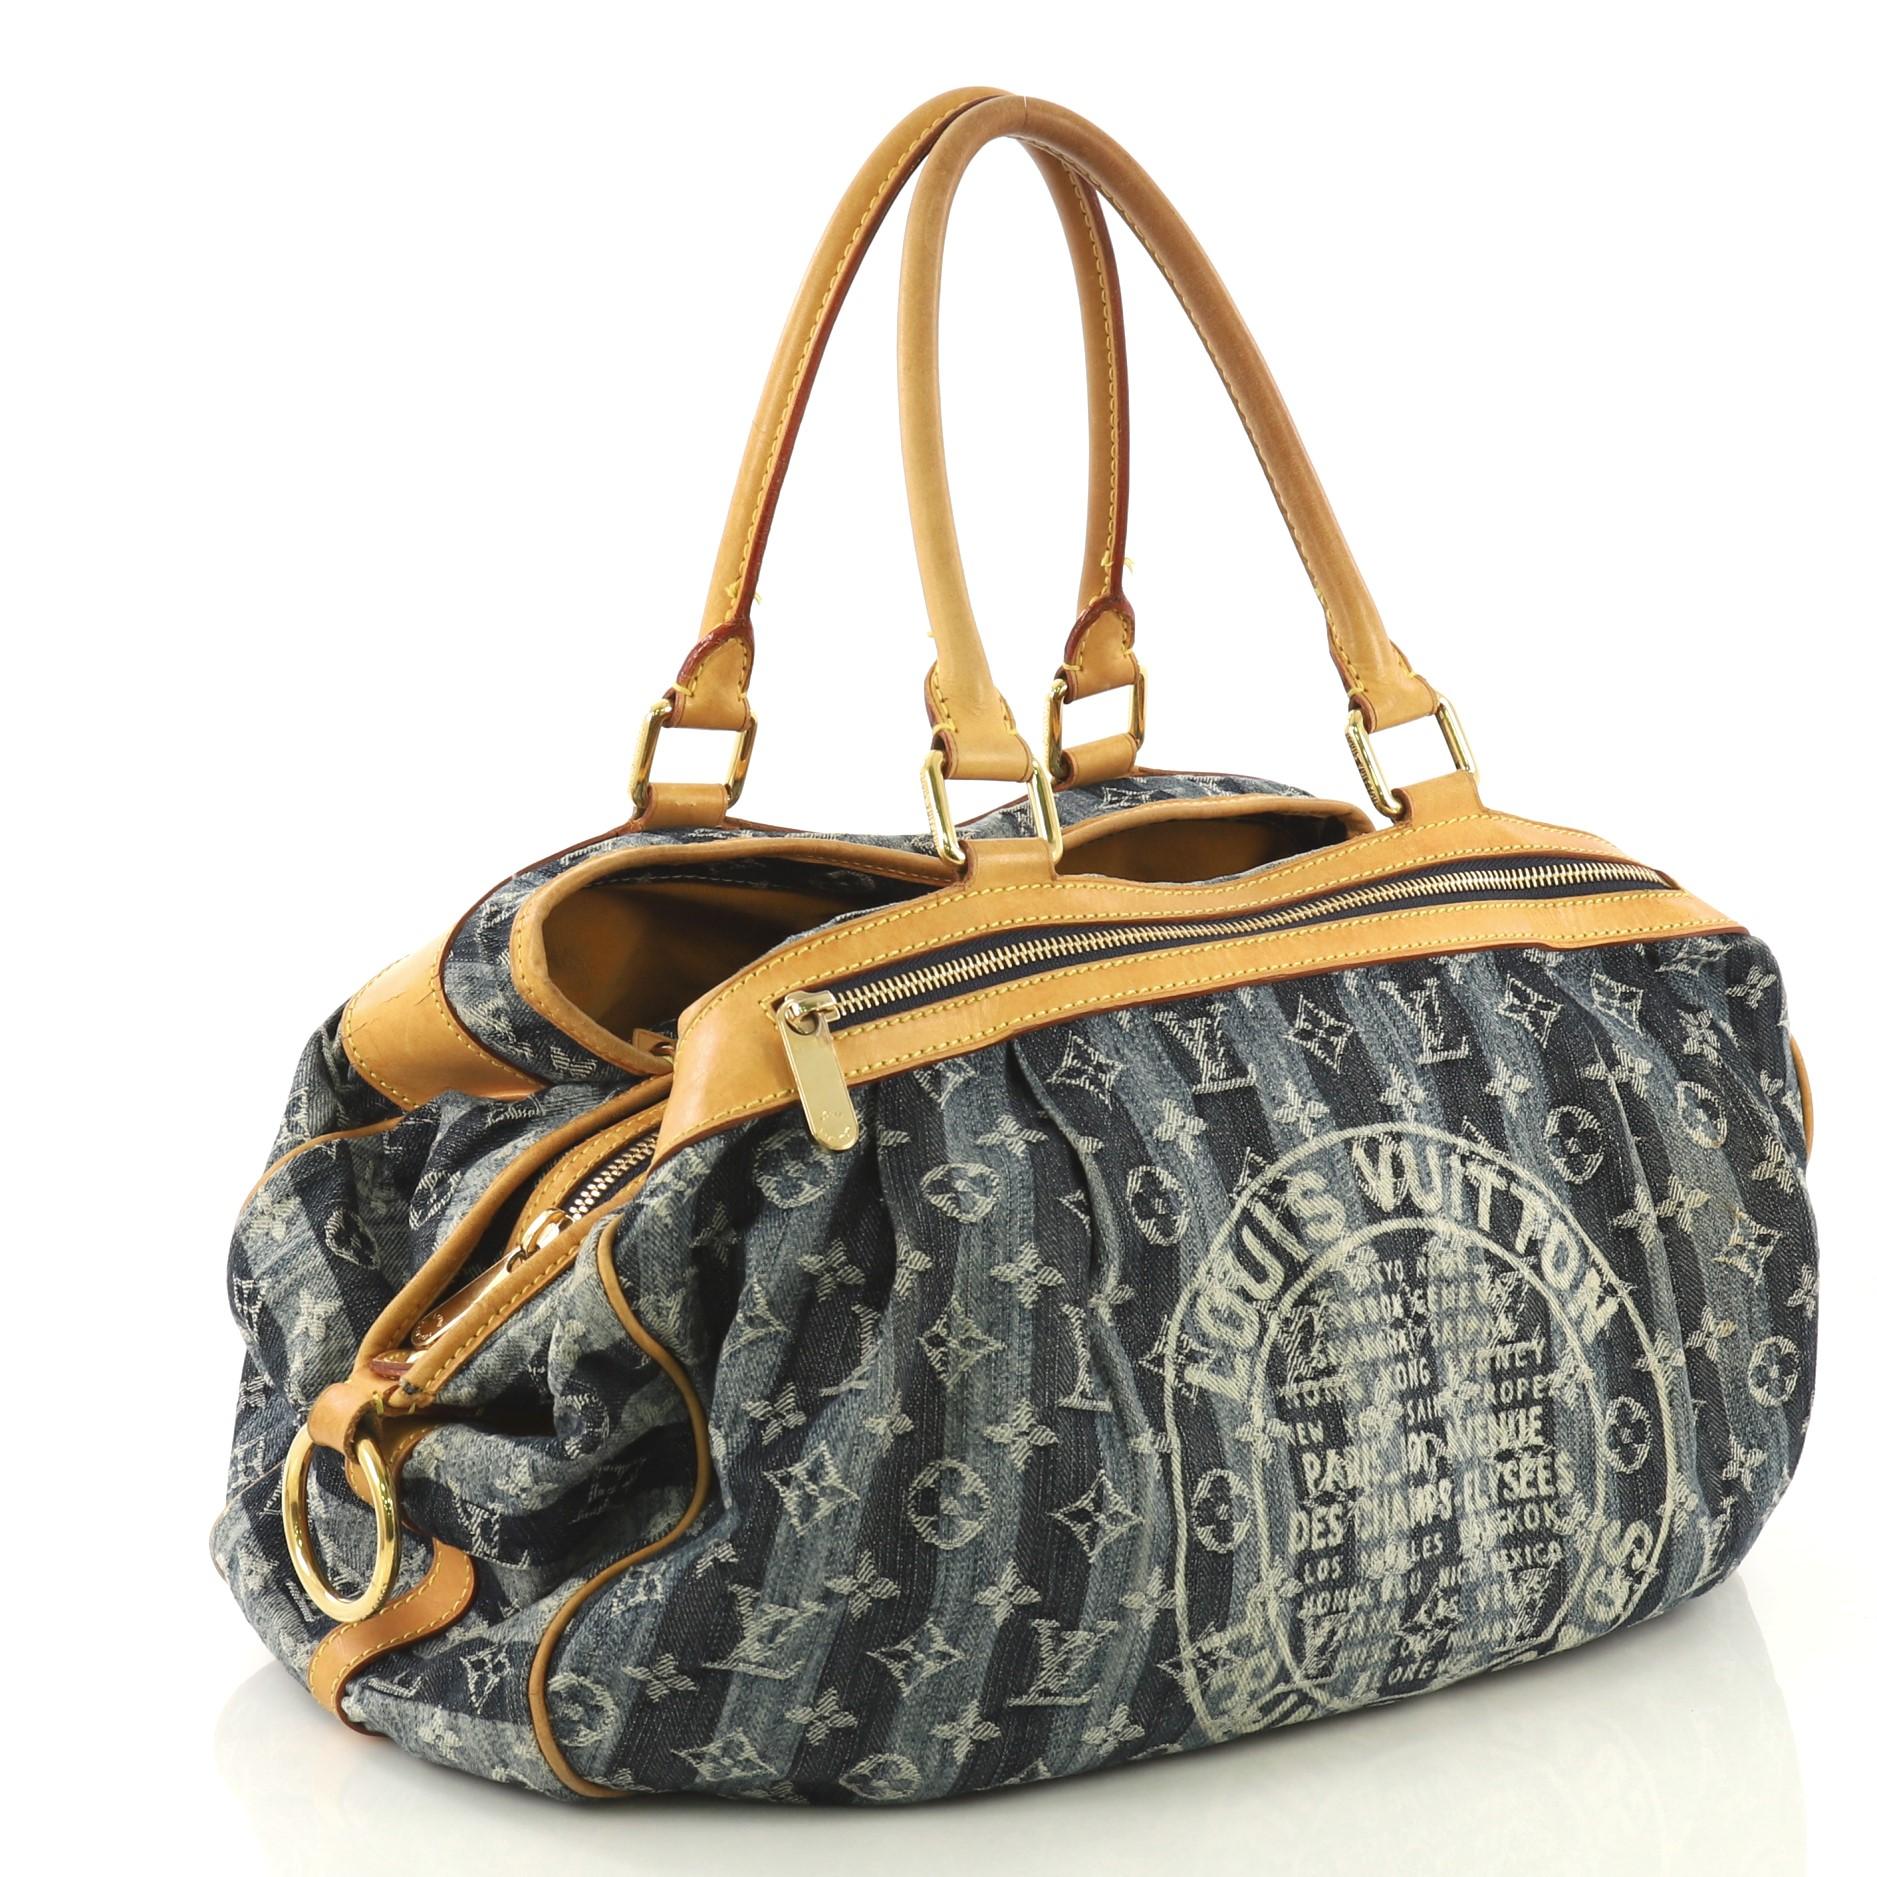 This Louis Vuitton Cabas Raye Limited Edition Denim GM, crafted from blue denim in monogram print, features printed Louis Vuitton Trunks Bags logo, dual rolled vachetta leather handles, and gold-tone hardware. Its zip and magnetic snap closures open